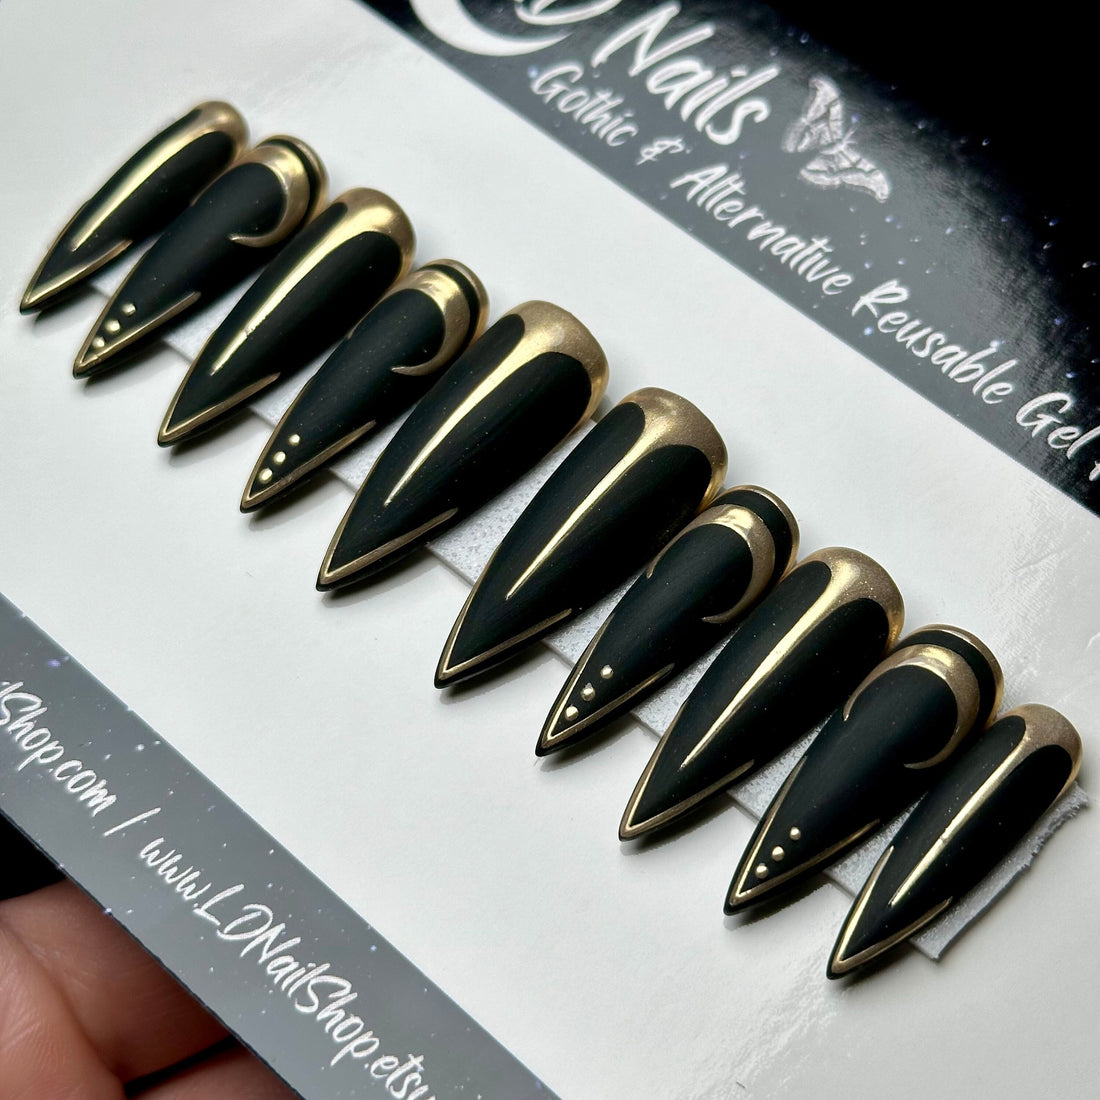 Wicked Regal, Black and Gold Witchy Moon Nails, Gothic Gold Chrome Press On Nails, Matte Goth Nails, Reusable False Nails, Press-on Nails